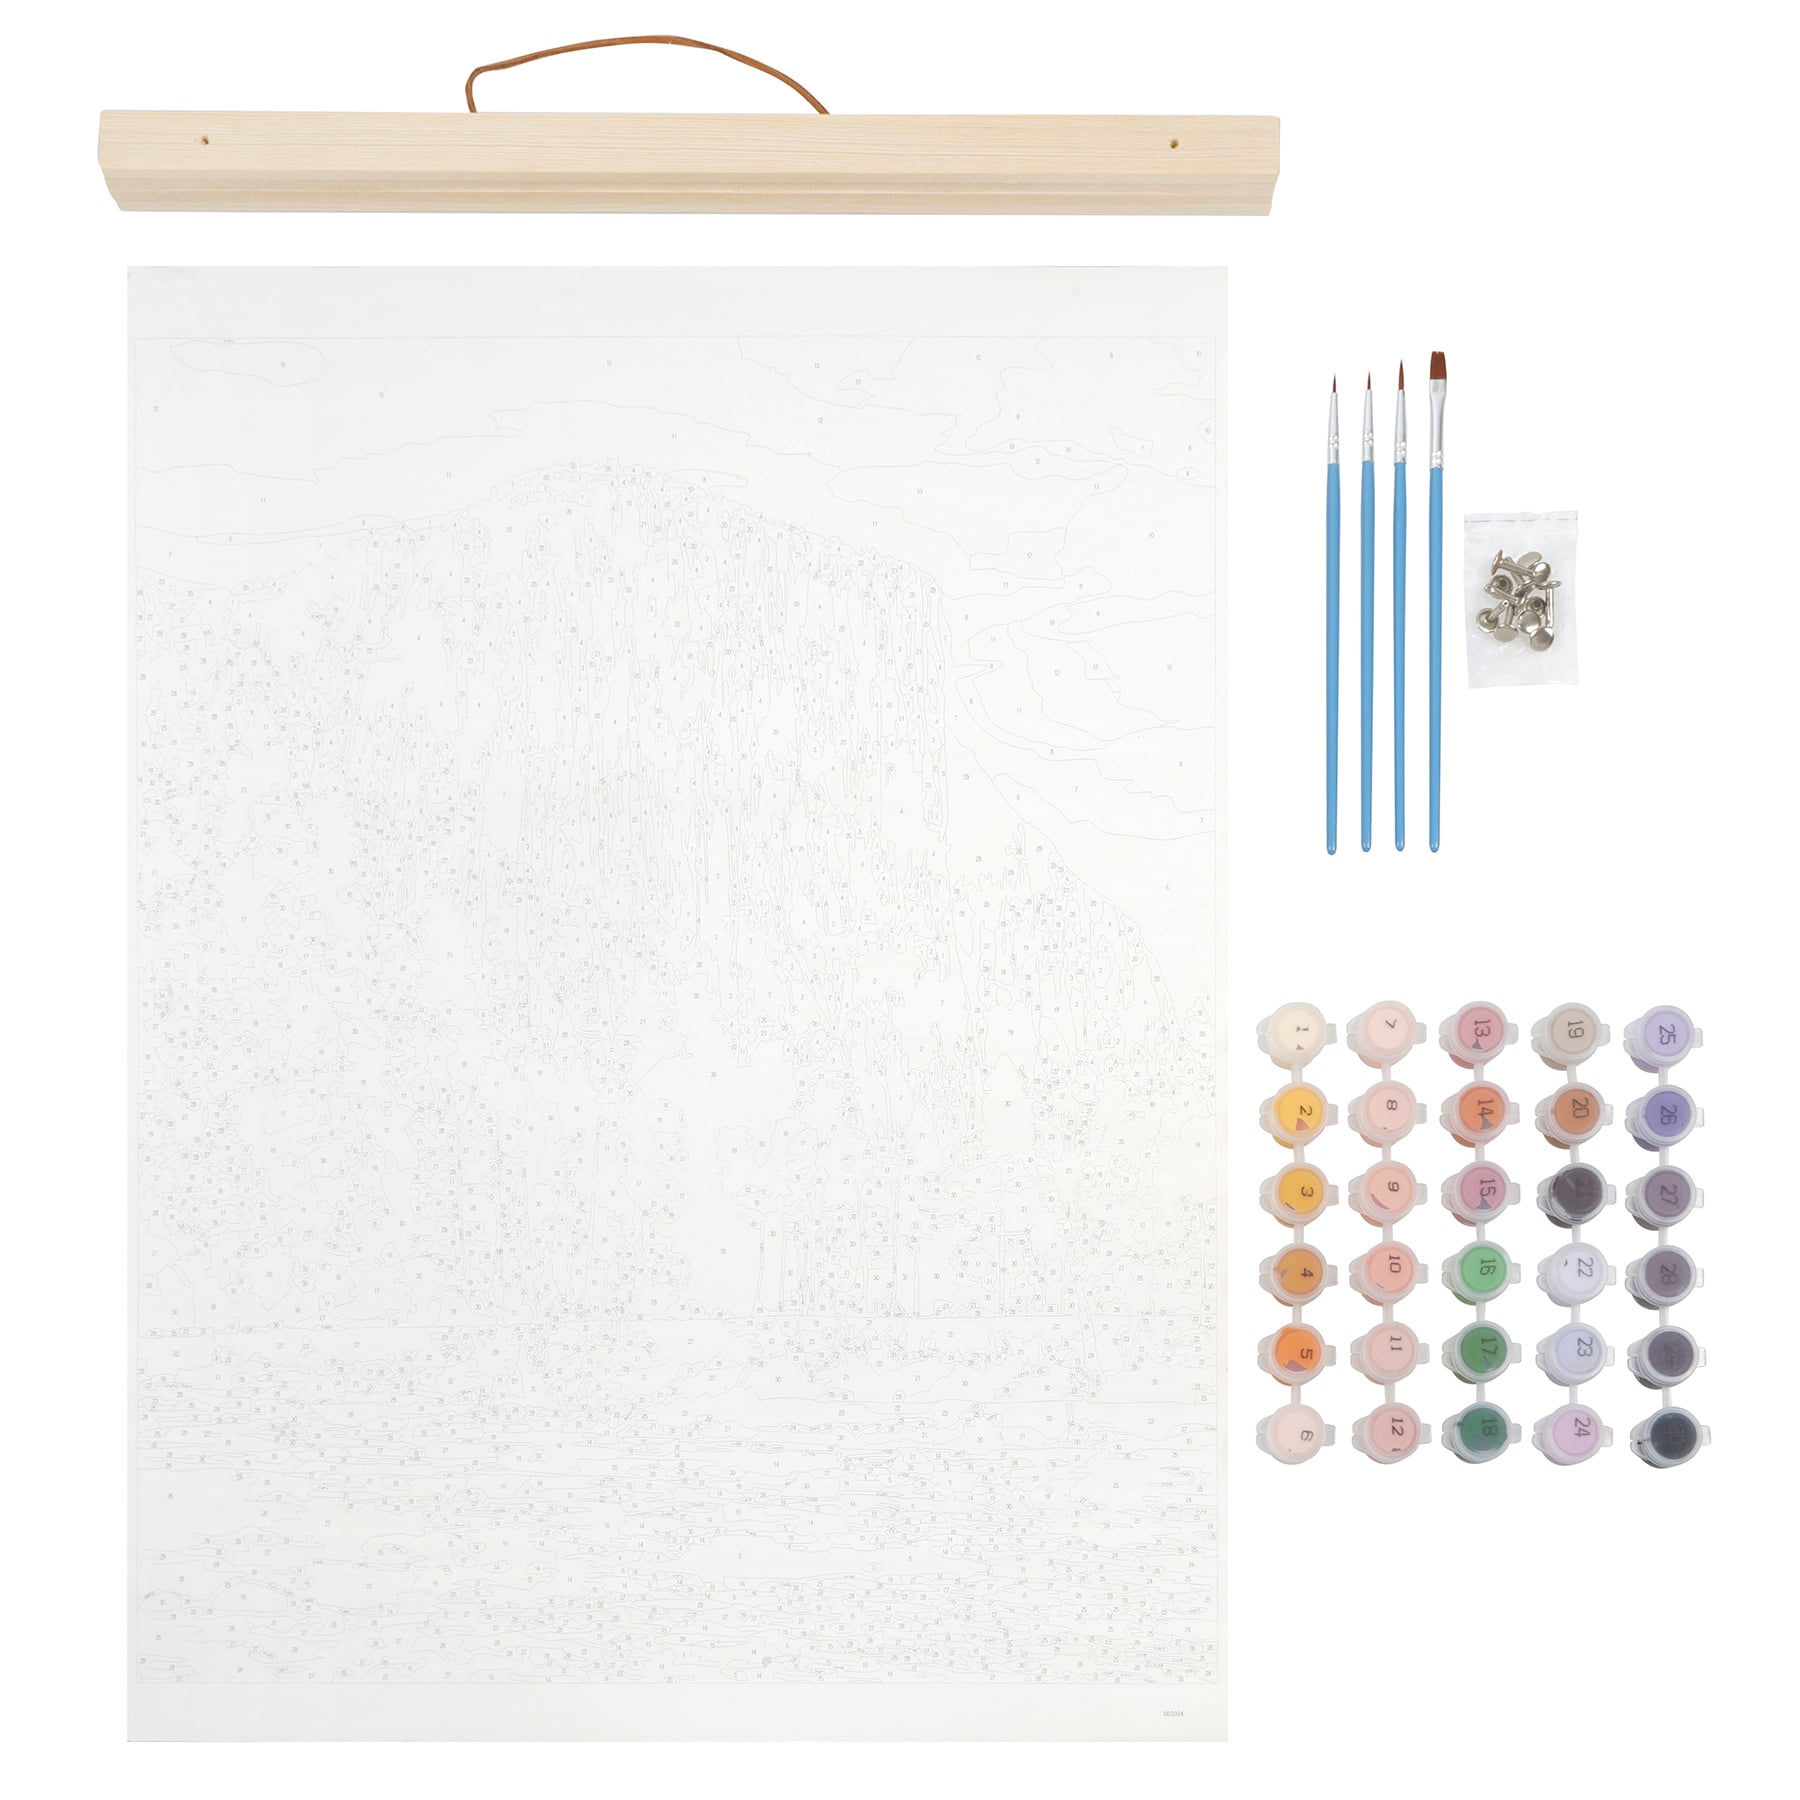 Man In The Water Paint By Numbers - Numeral Paint Kit